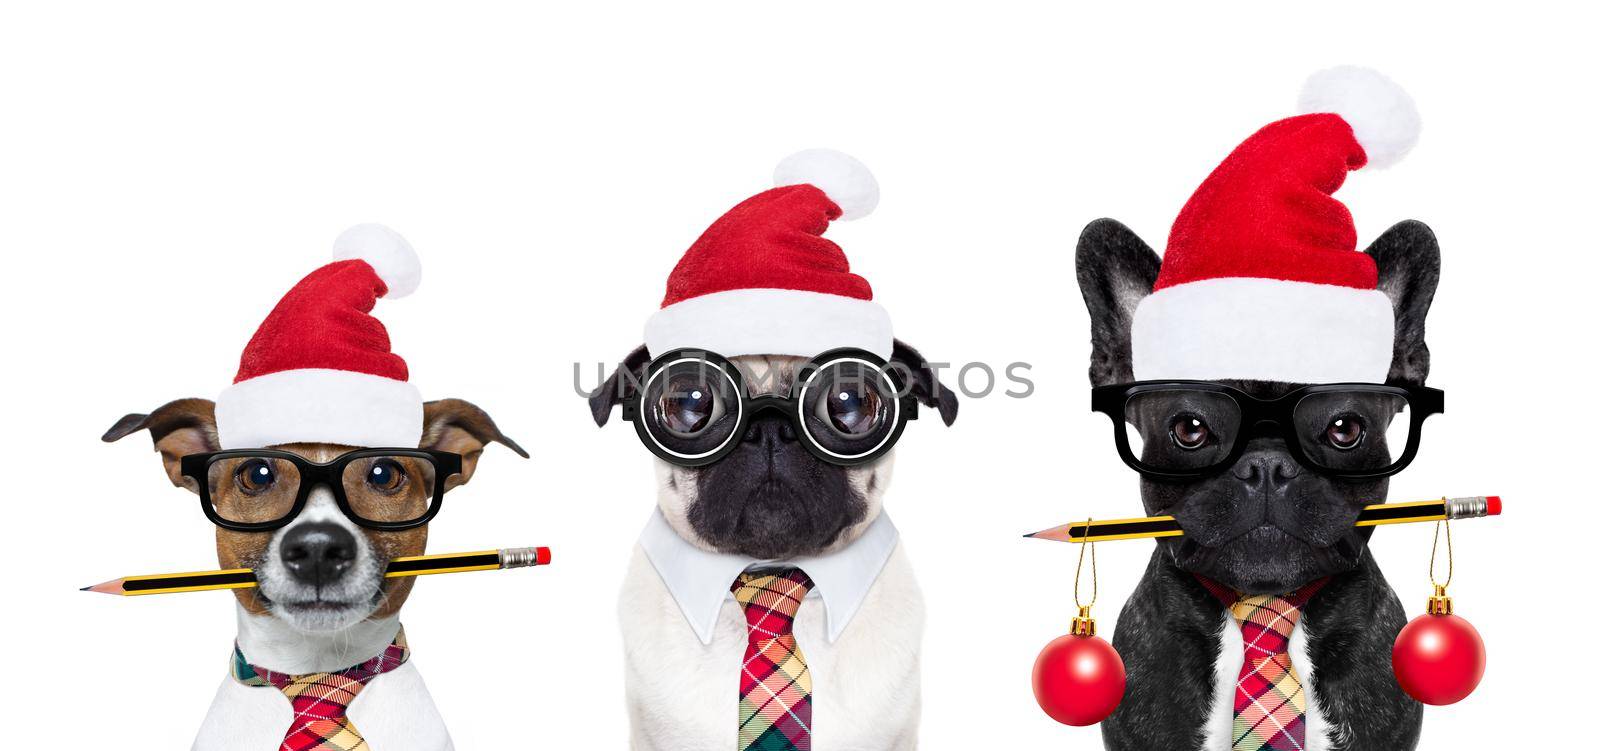 row or group of dogs in working team with nerd glasses as an office business worker, isolated on white background, on christmas holidays vacation with red santa claus hats